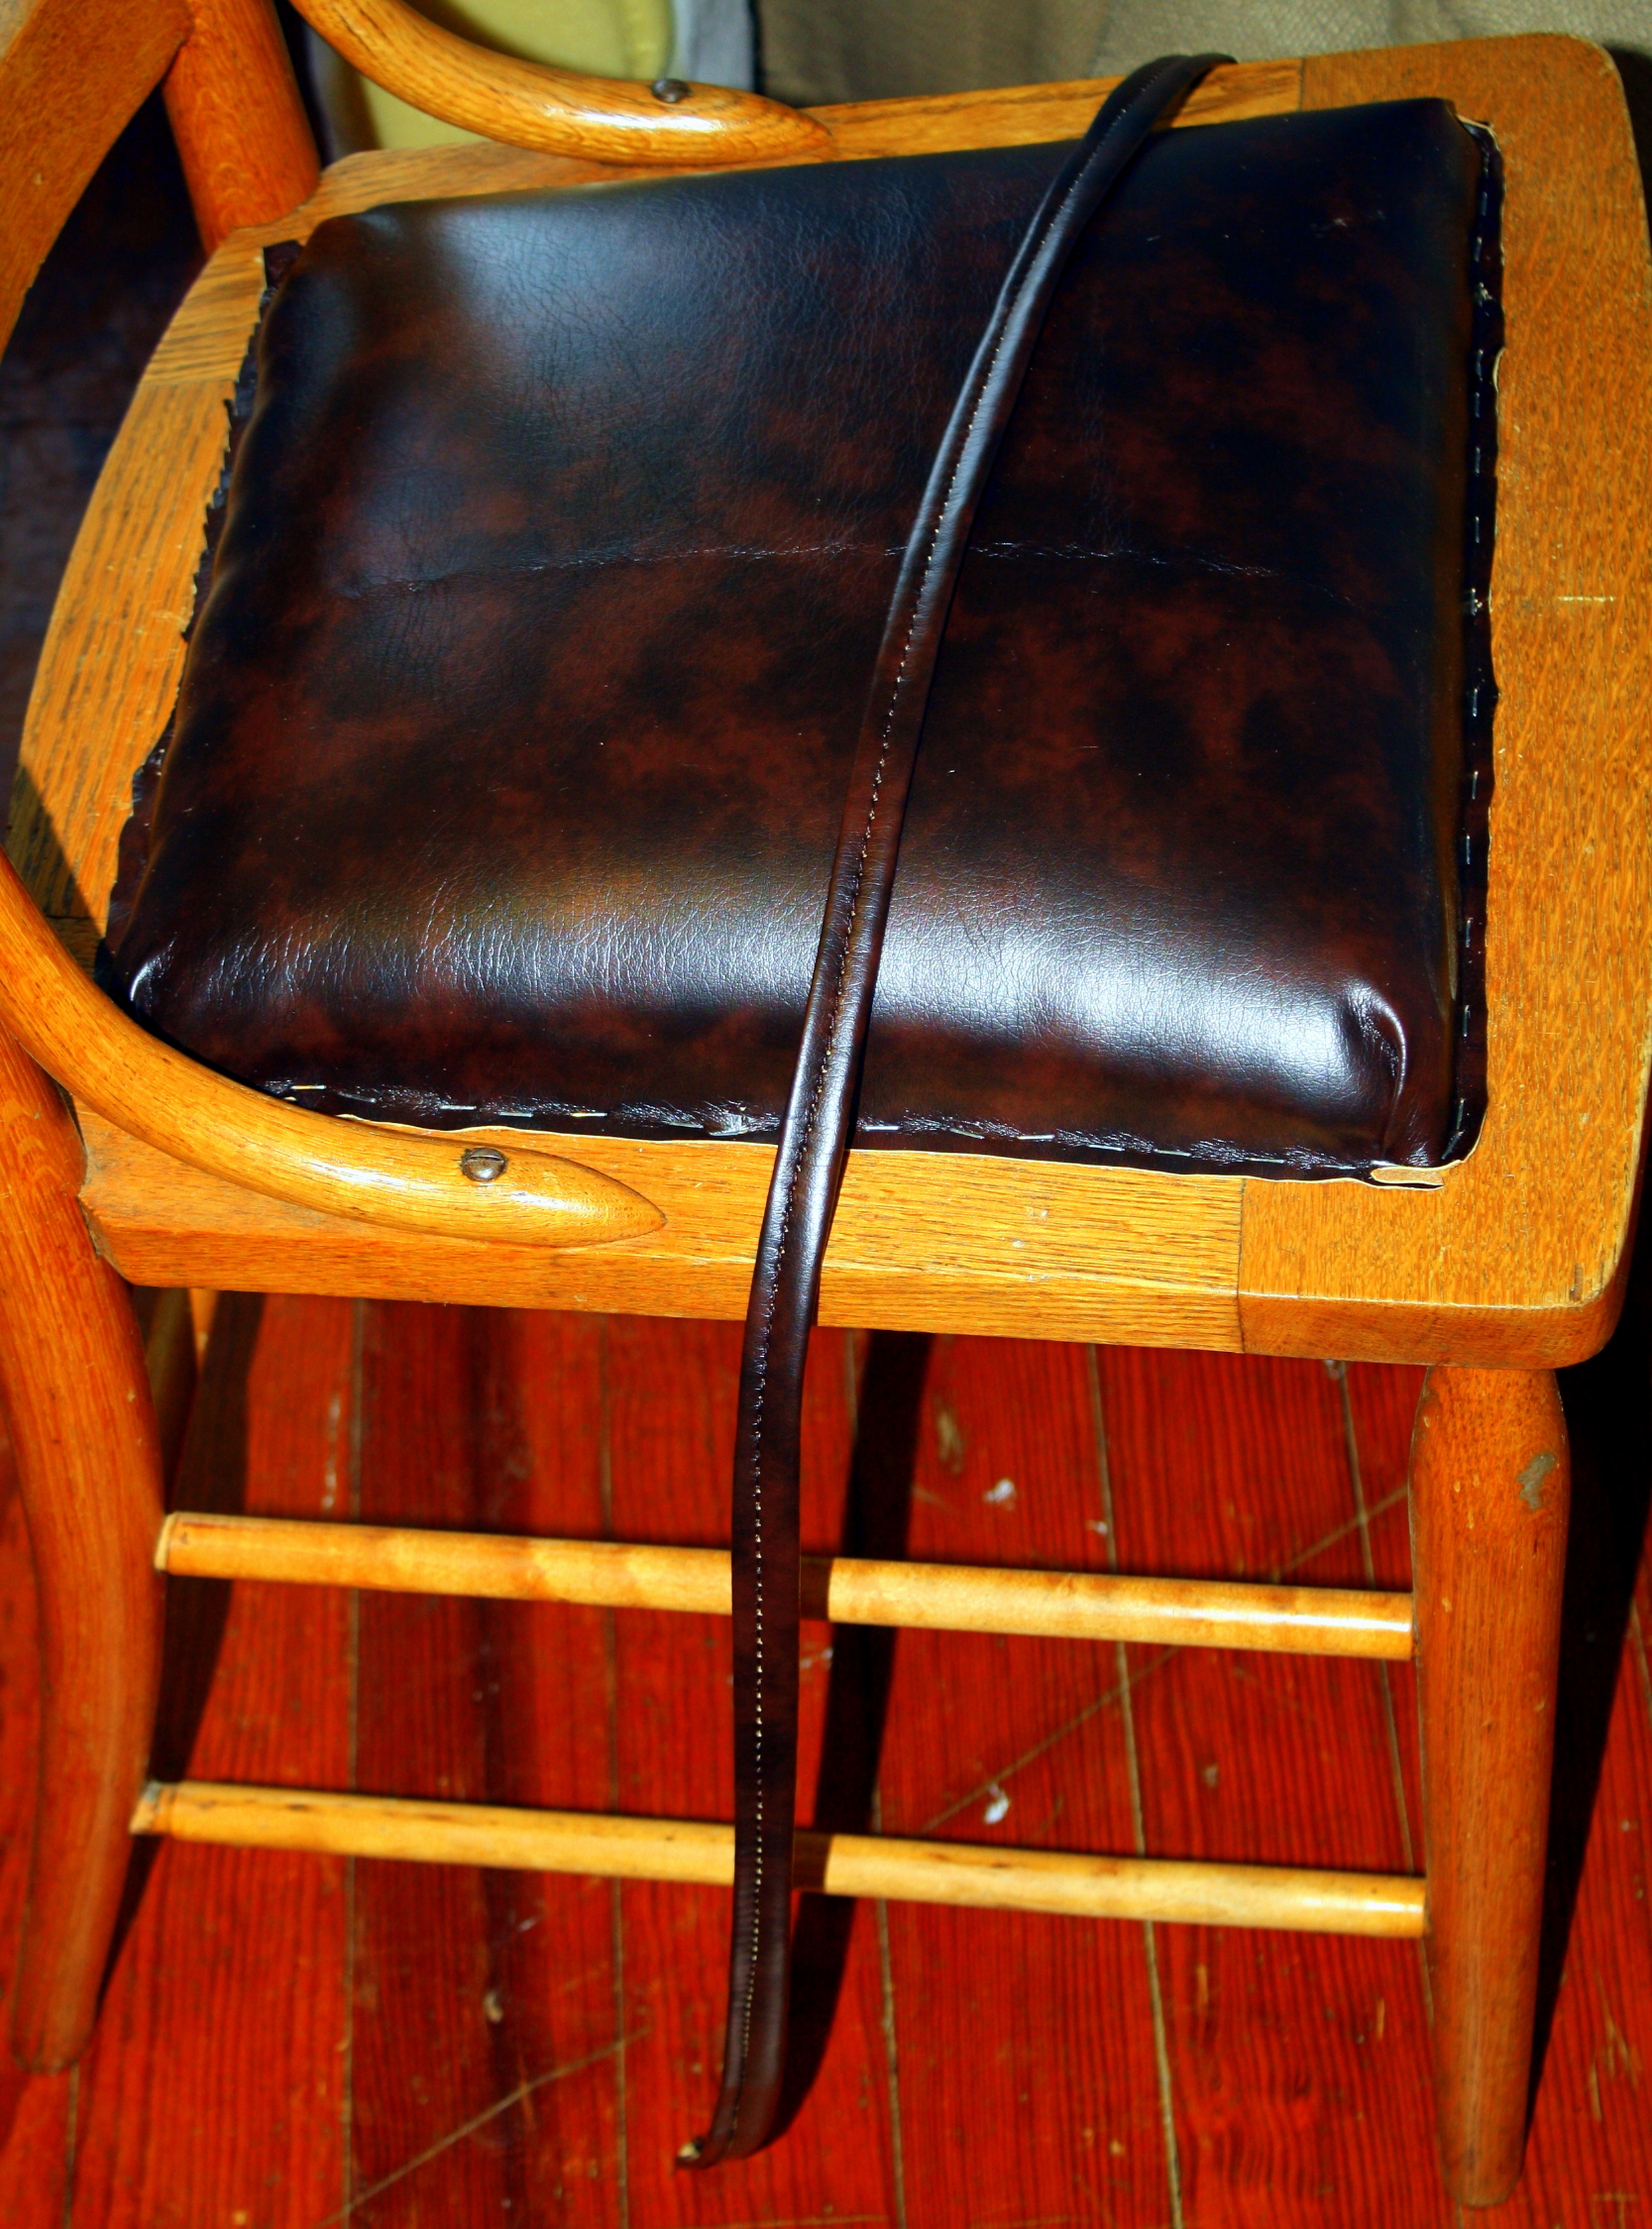 Simple Fix for a Broken Cane Seat  Confessions of a Serial Do-it-Yourselfer